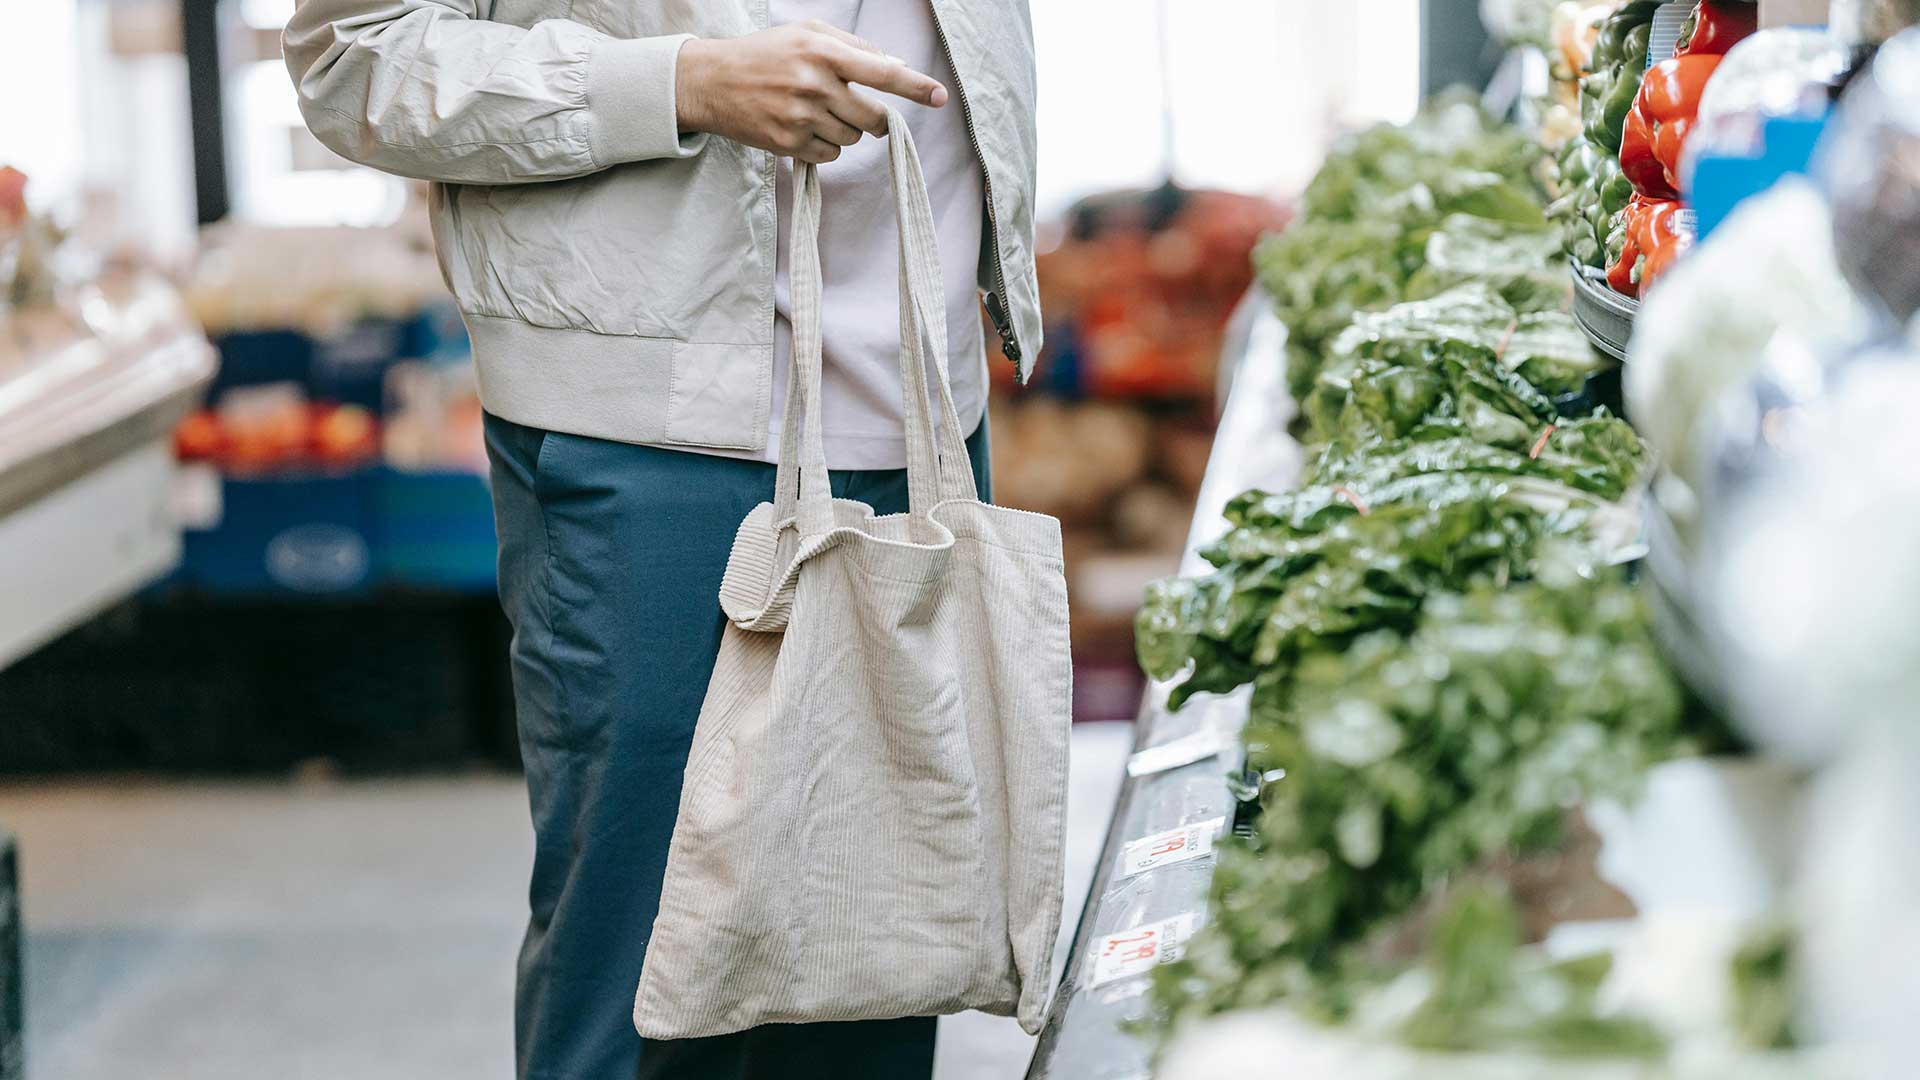 Person holding reusable bag standing in produce aisle